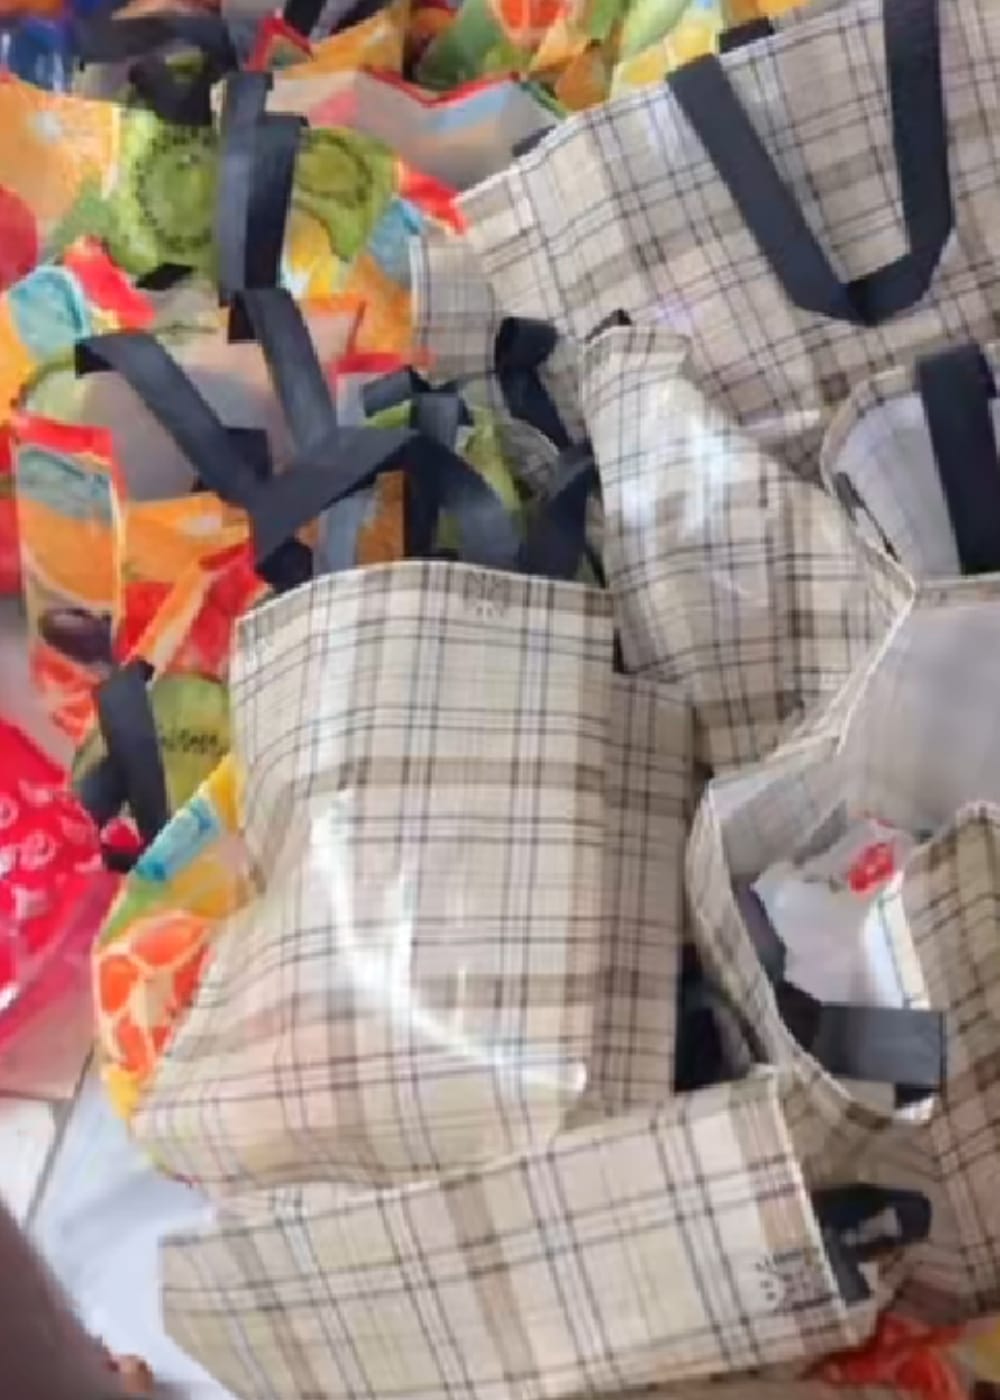 Mother Surprises Daughter with Souvenirs and Food for Guests at Her Small Introduction, Video Trends on TikTok